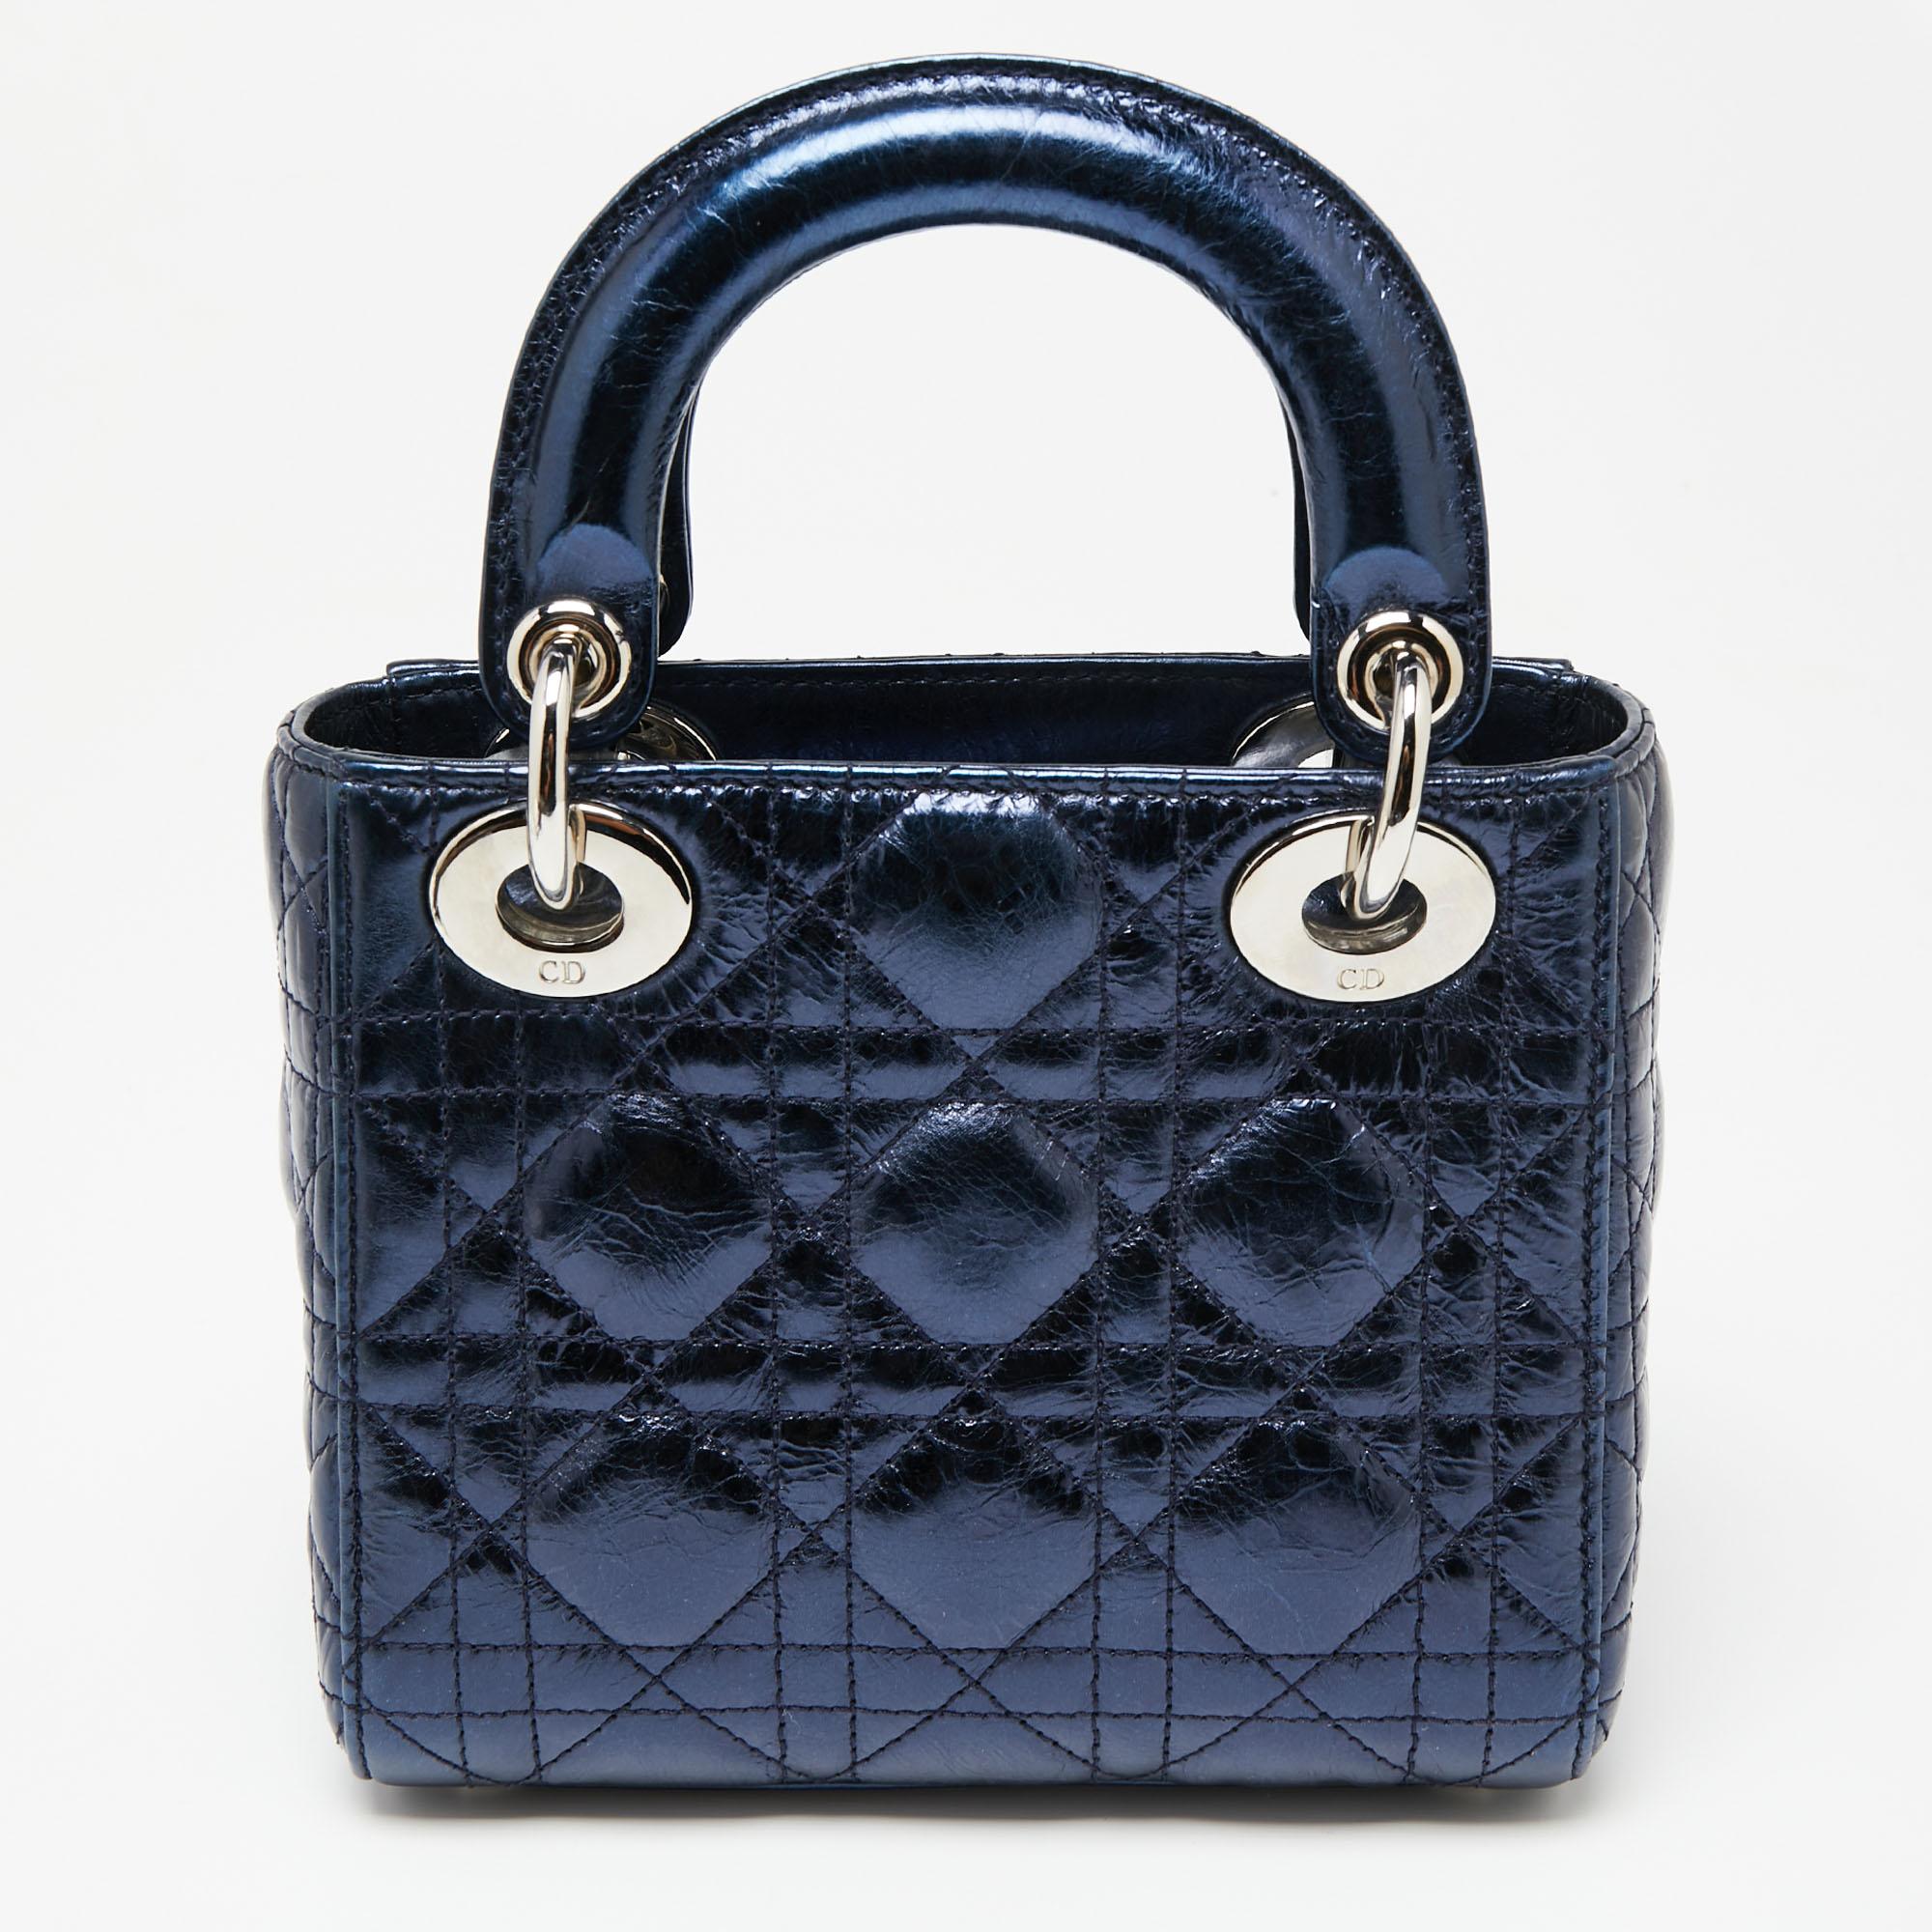 A timeless status and great design mark the Lady Dior tote. It is an iconic bag that people continue to invest in to this day. We have here this mini Lady Dior tote crafted from crinkled leather. The bag is complete with two top handles, a shoulder